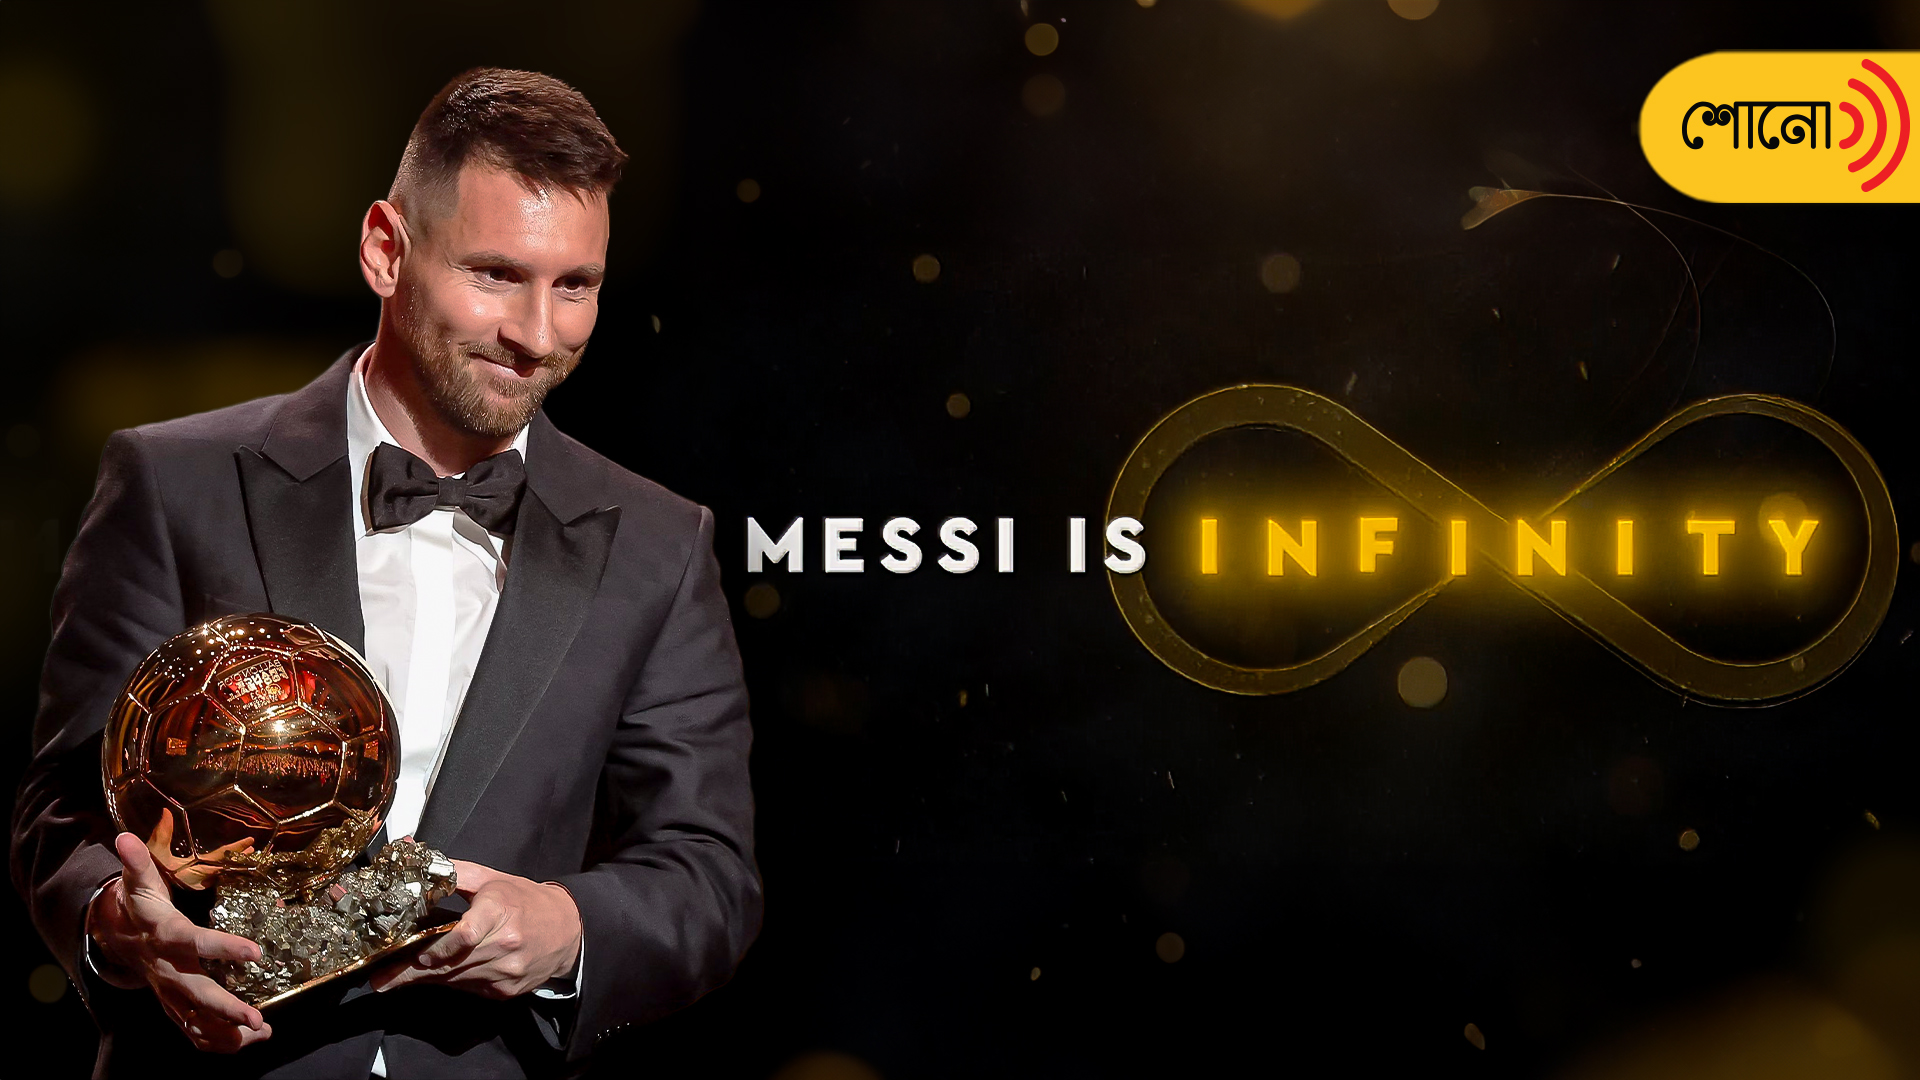 Lionel Messi Wins His 8th Ballon d’Or Award Recognizing Top Soccer Player of the Year